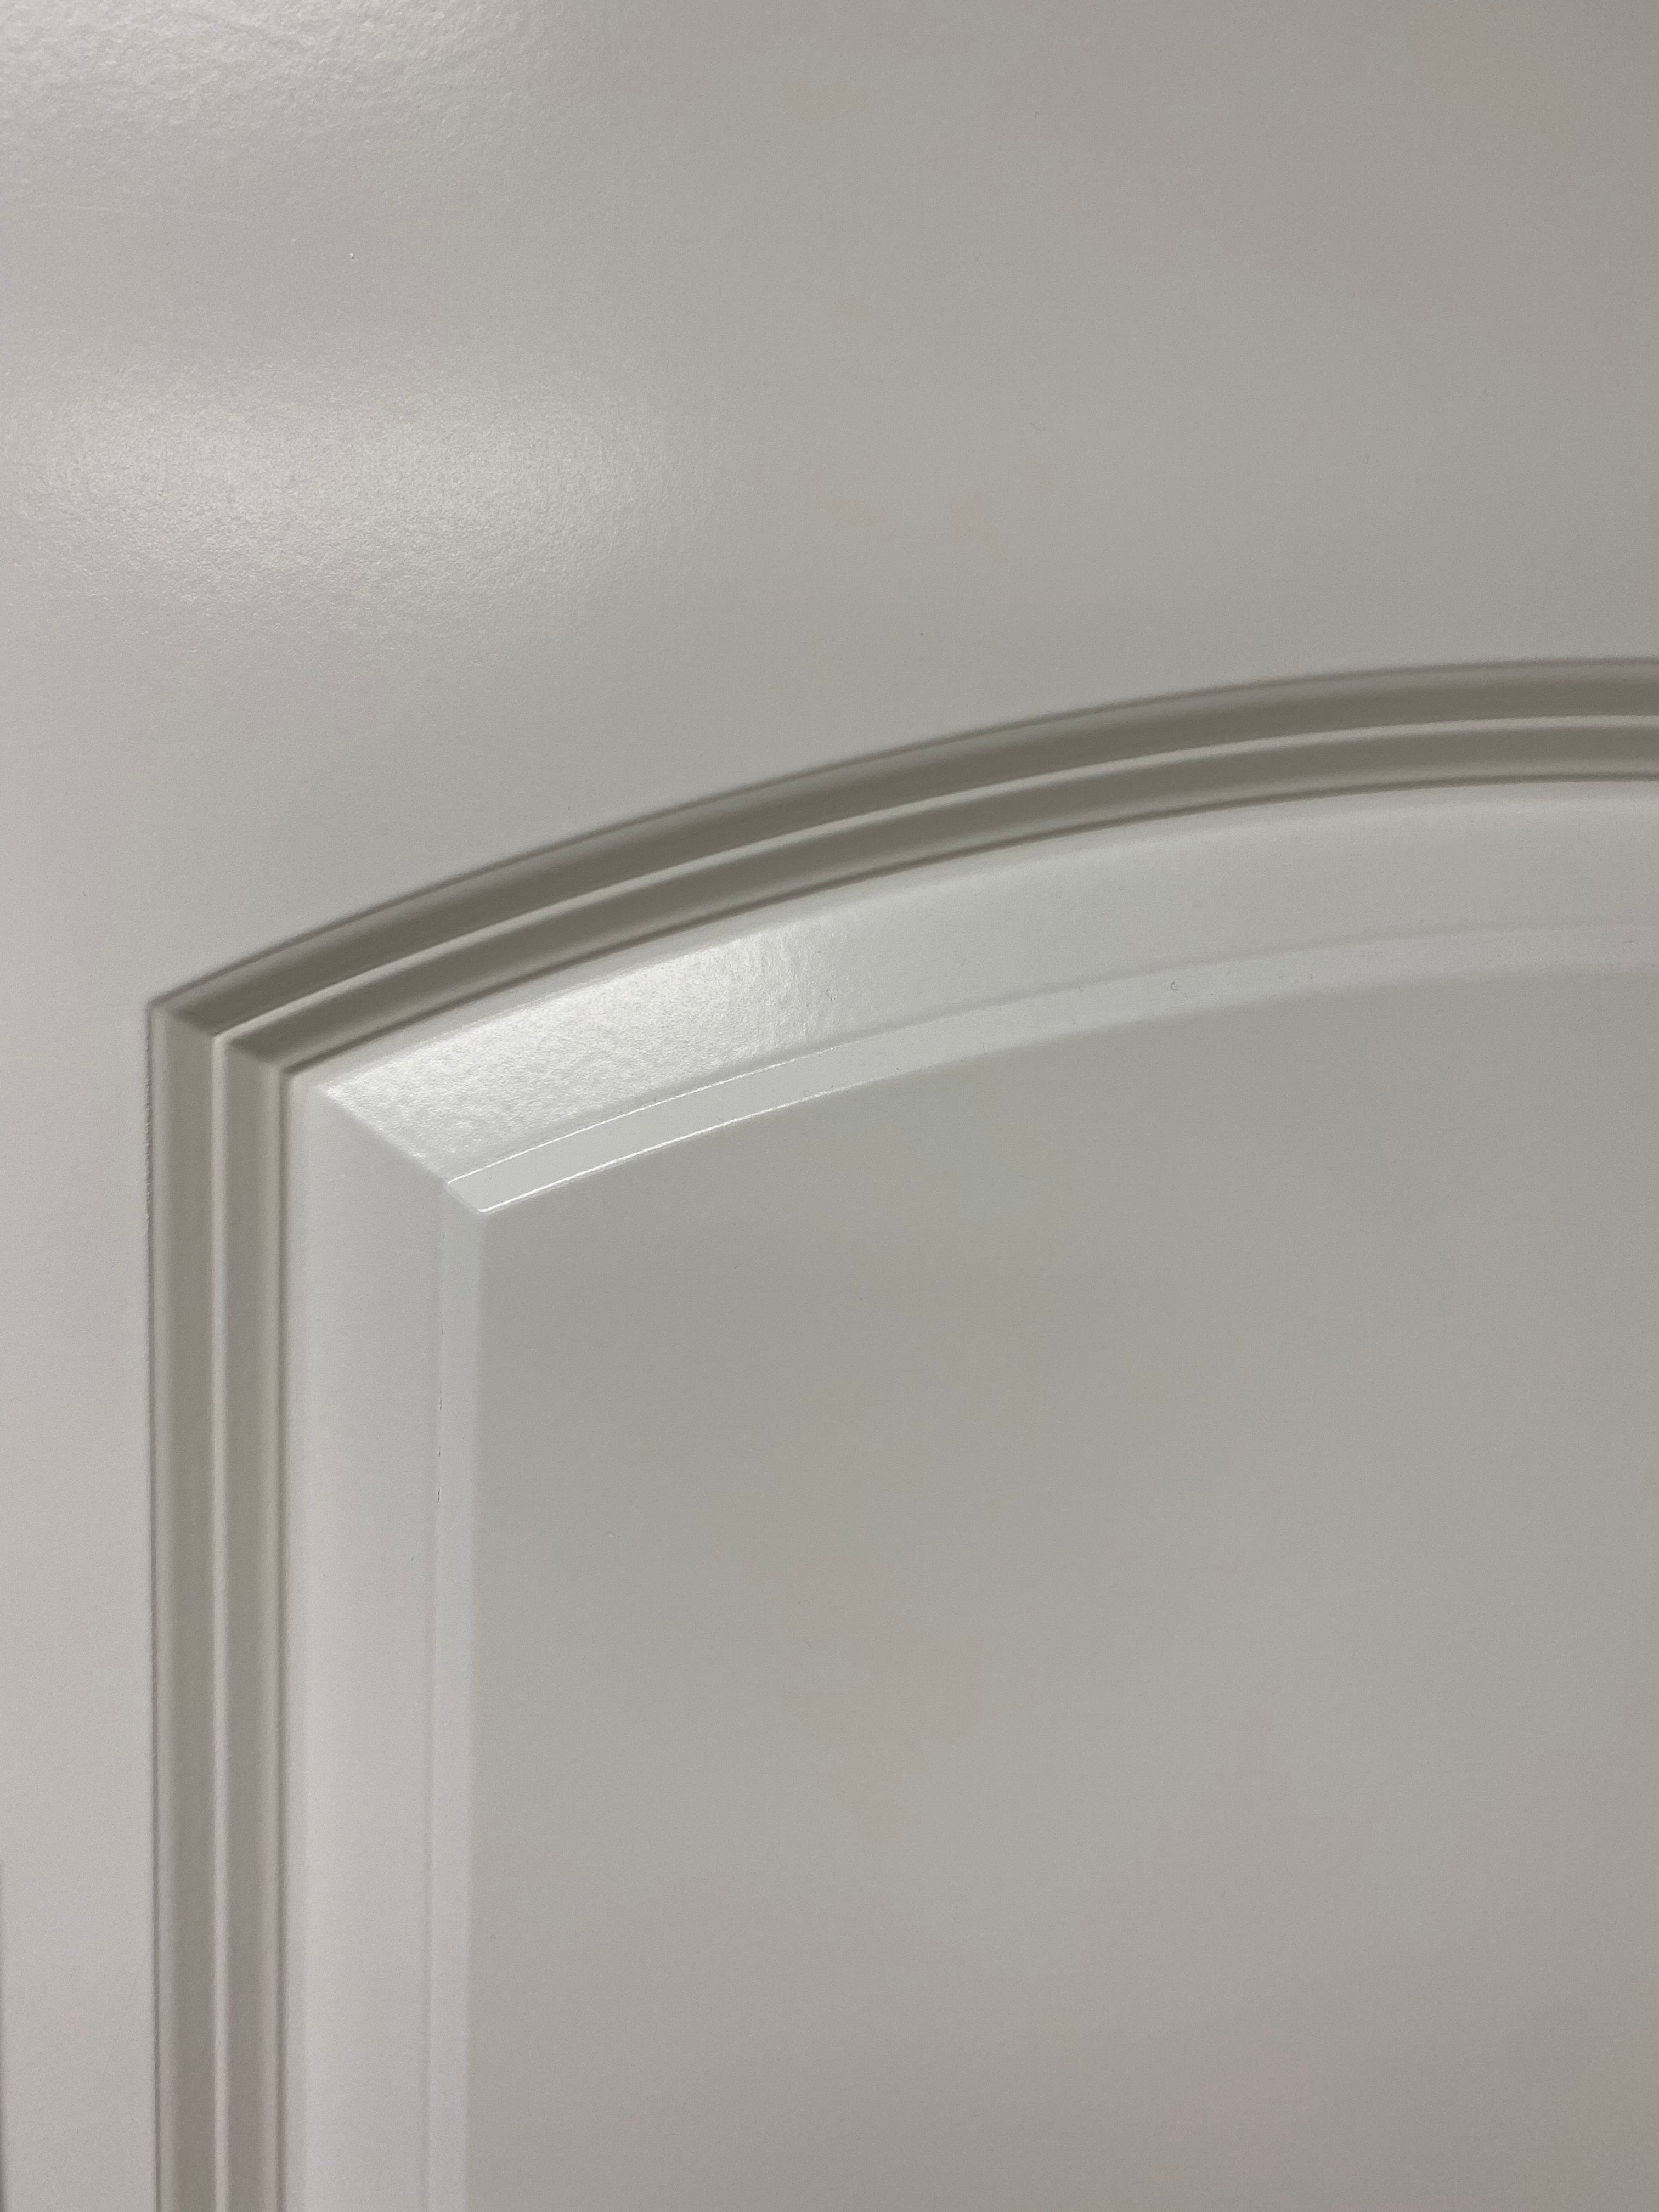 2 Panel Arch Caiman with Louver Insert Primed 7'-0" (84")